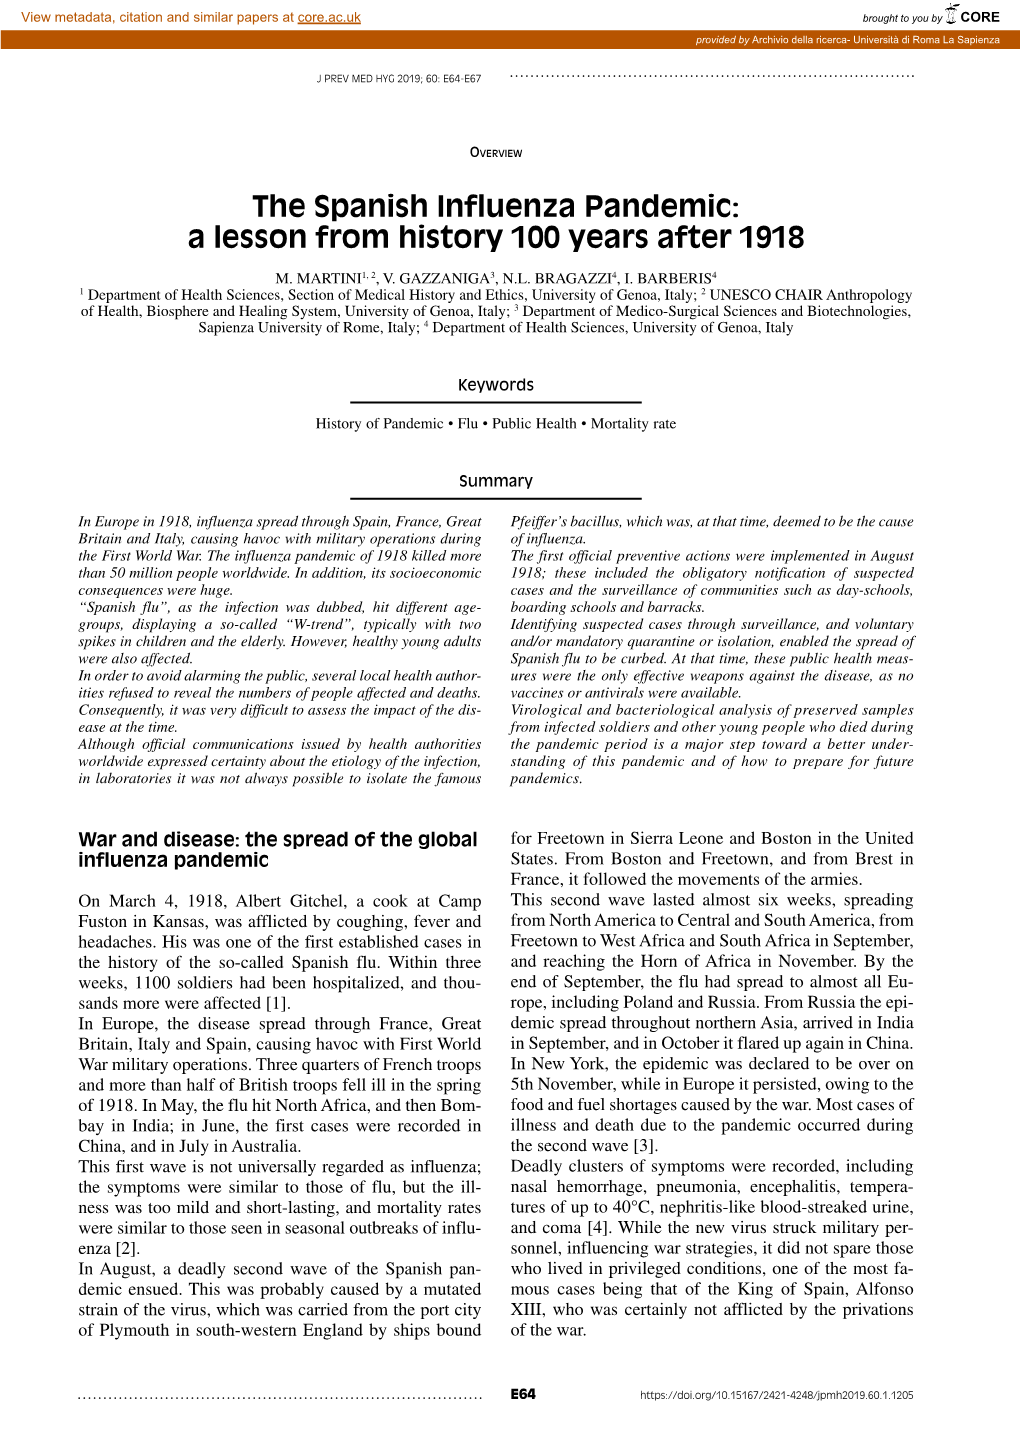 The Spanish Influenza Pandemic: a Lesson from History 100 Years After 1918